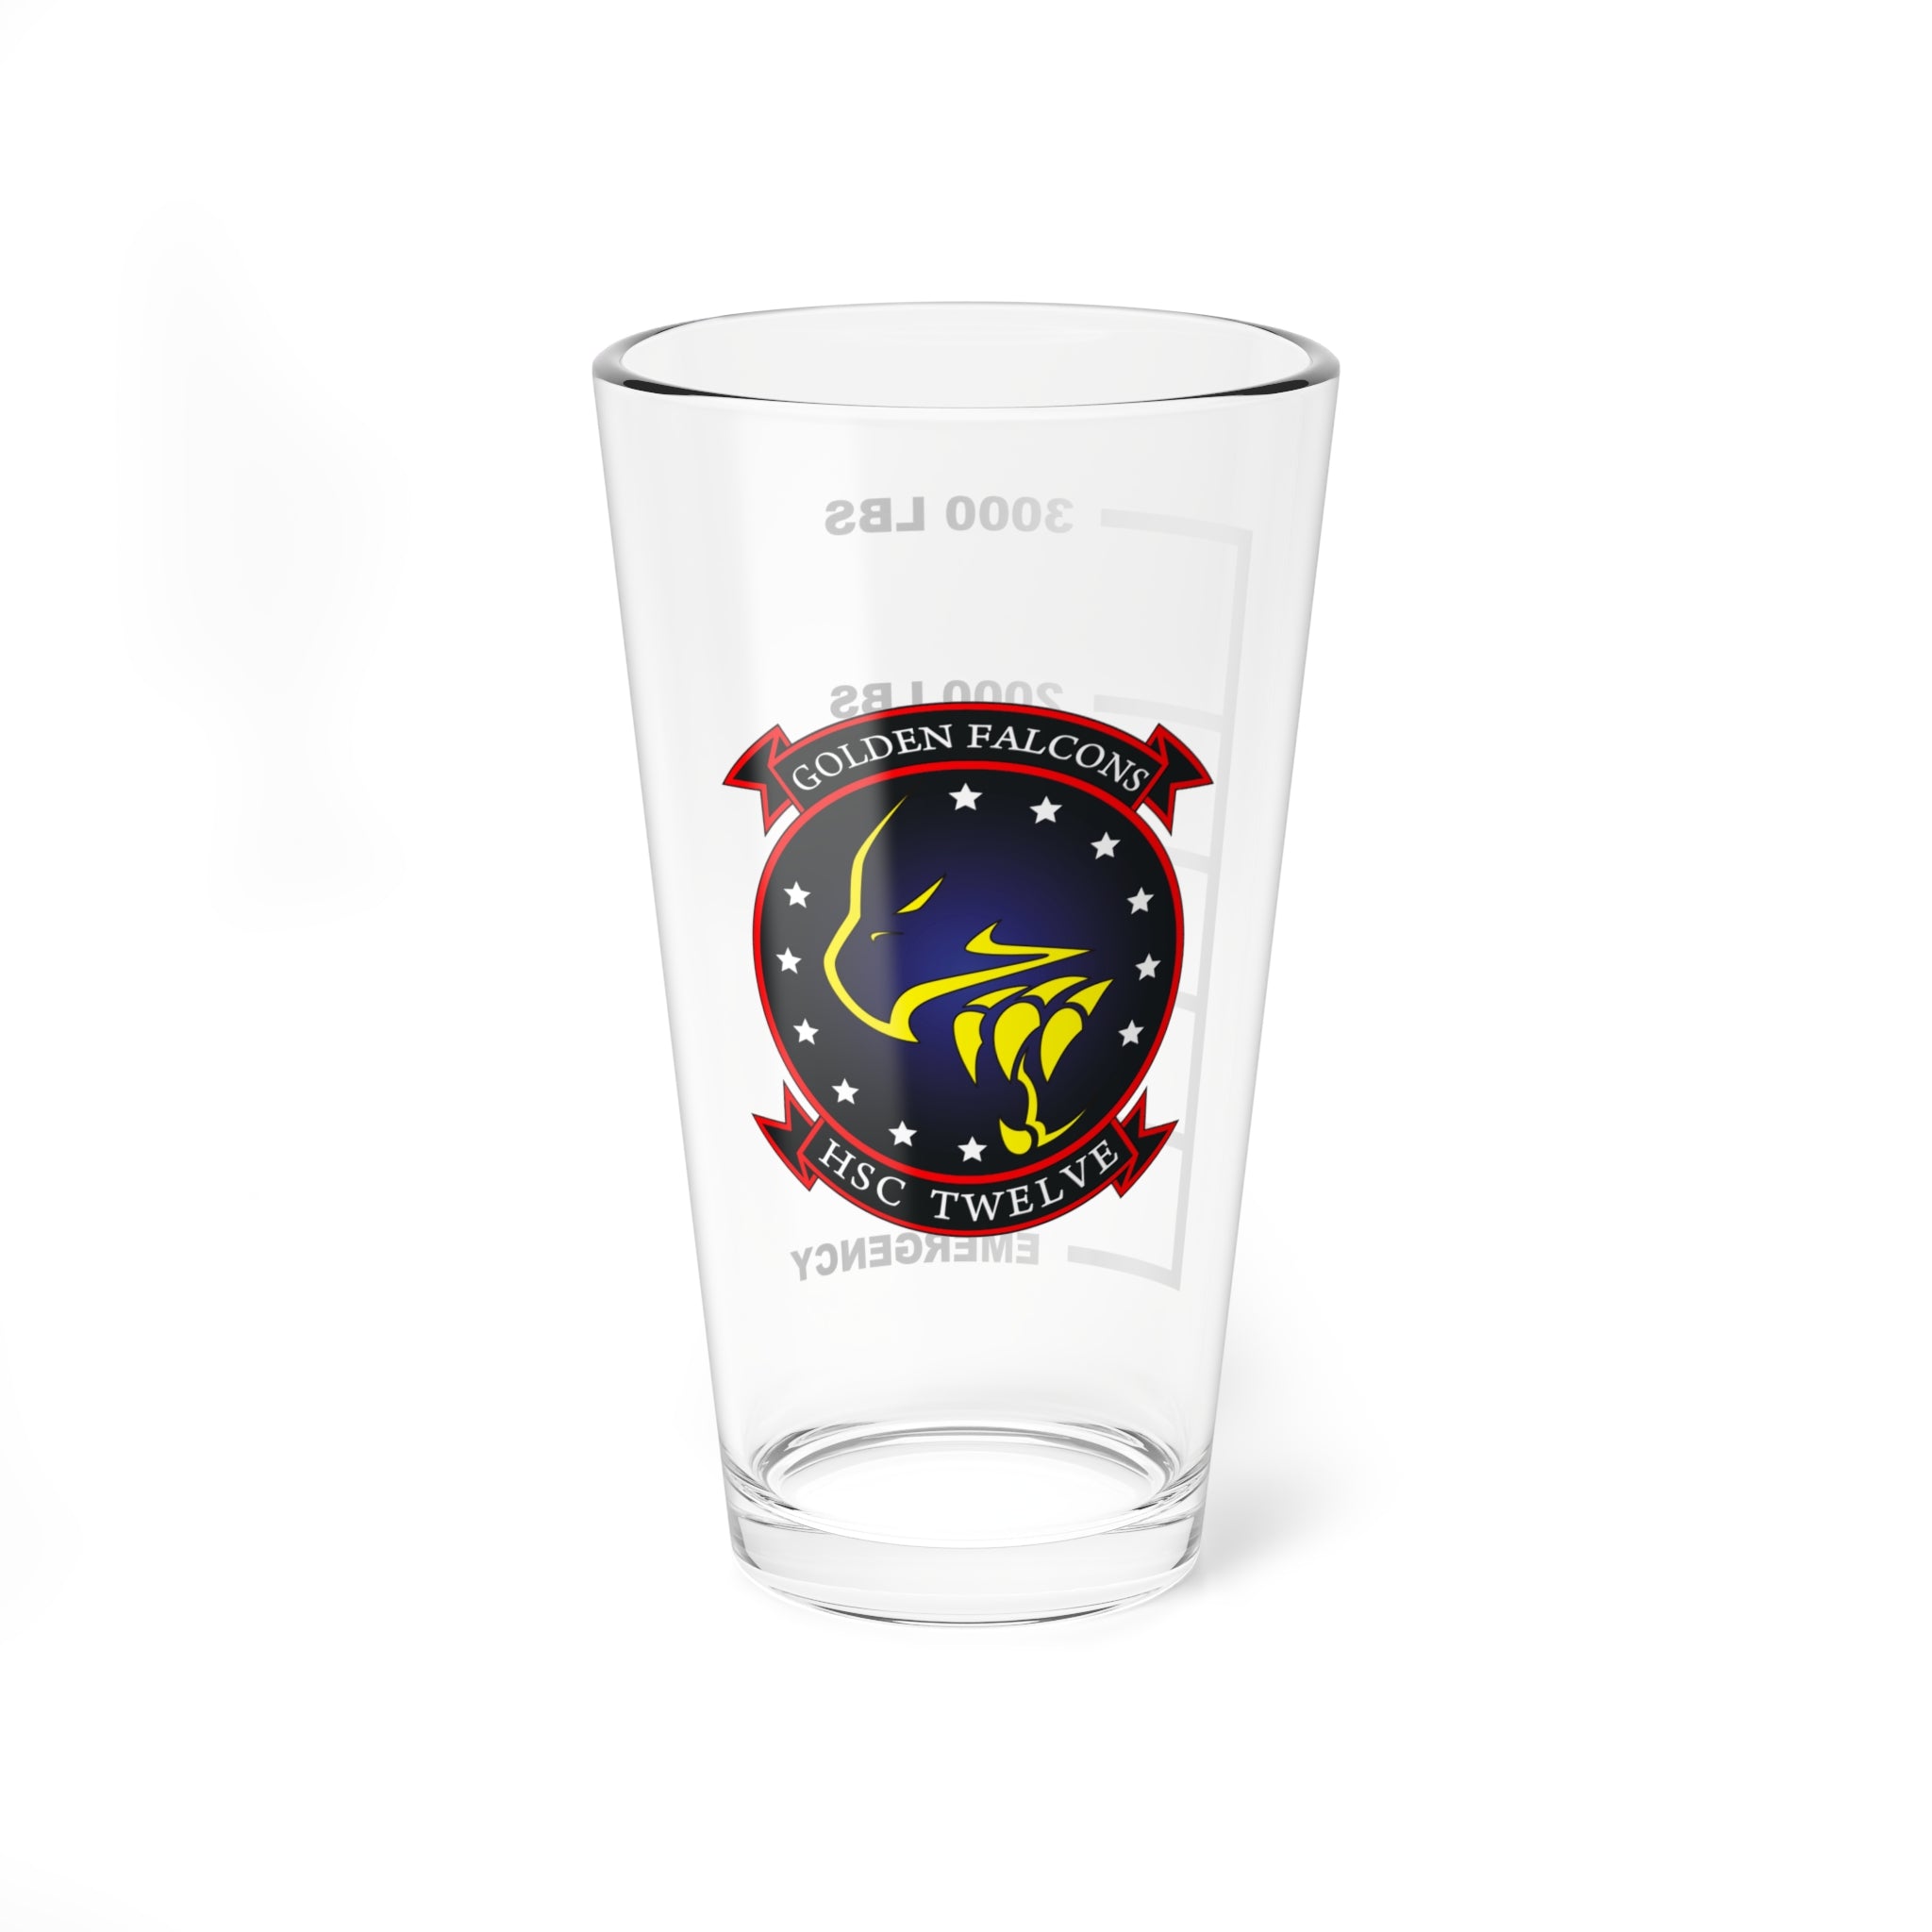 HSC-12 "Golden Falcons" Fuel Low Pint Glass, Navy Helicopter Combat Fleet Support Squadron flying the MH-60S Knight Hawk